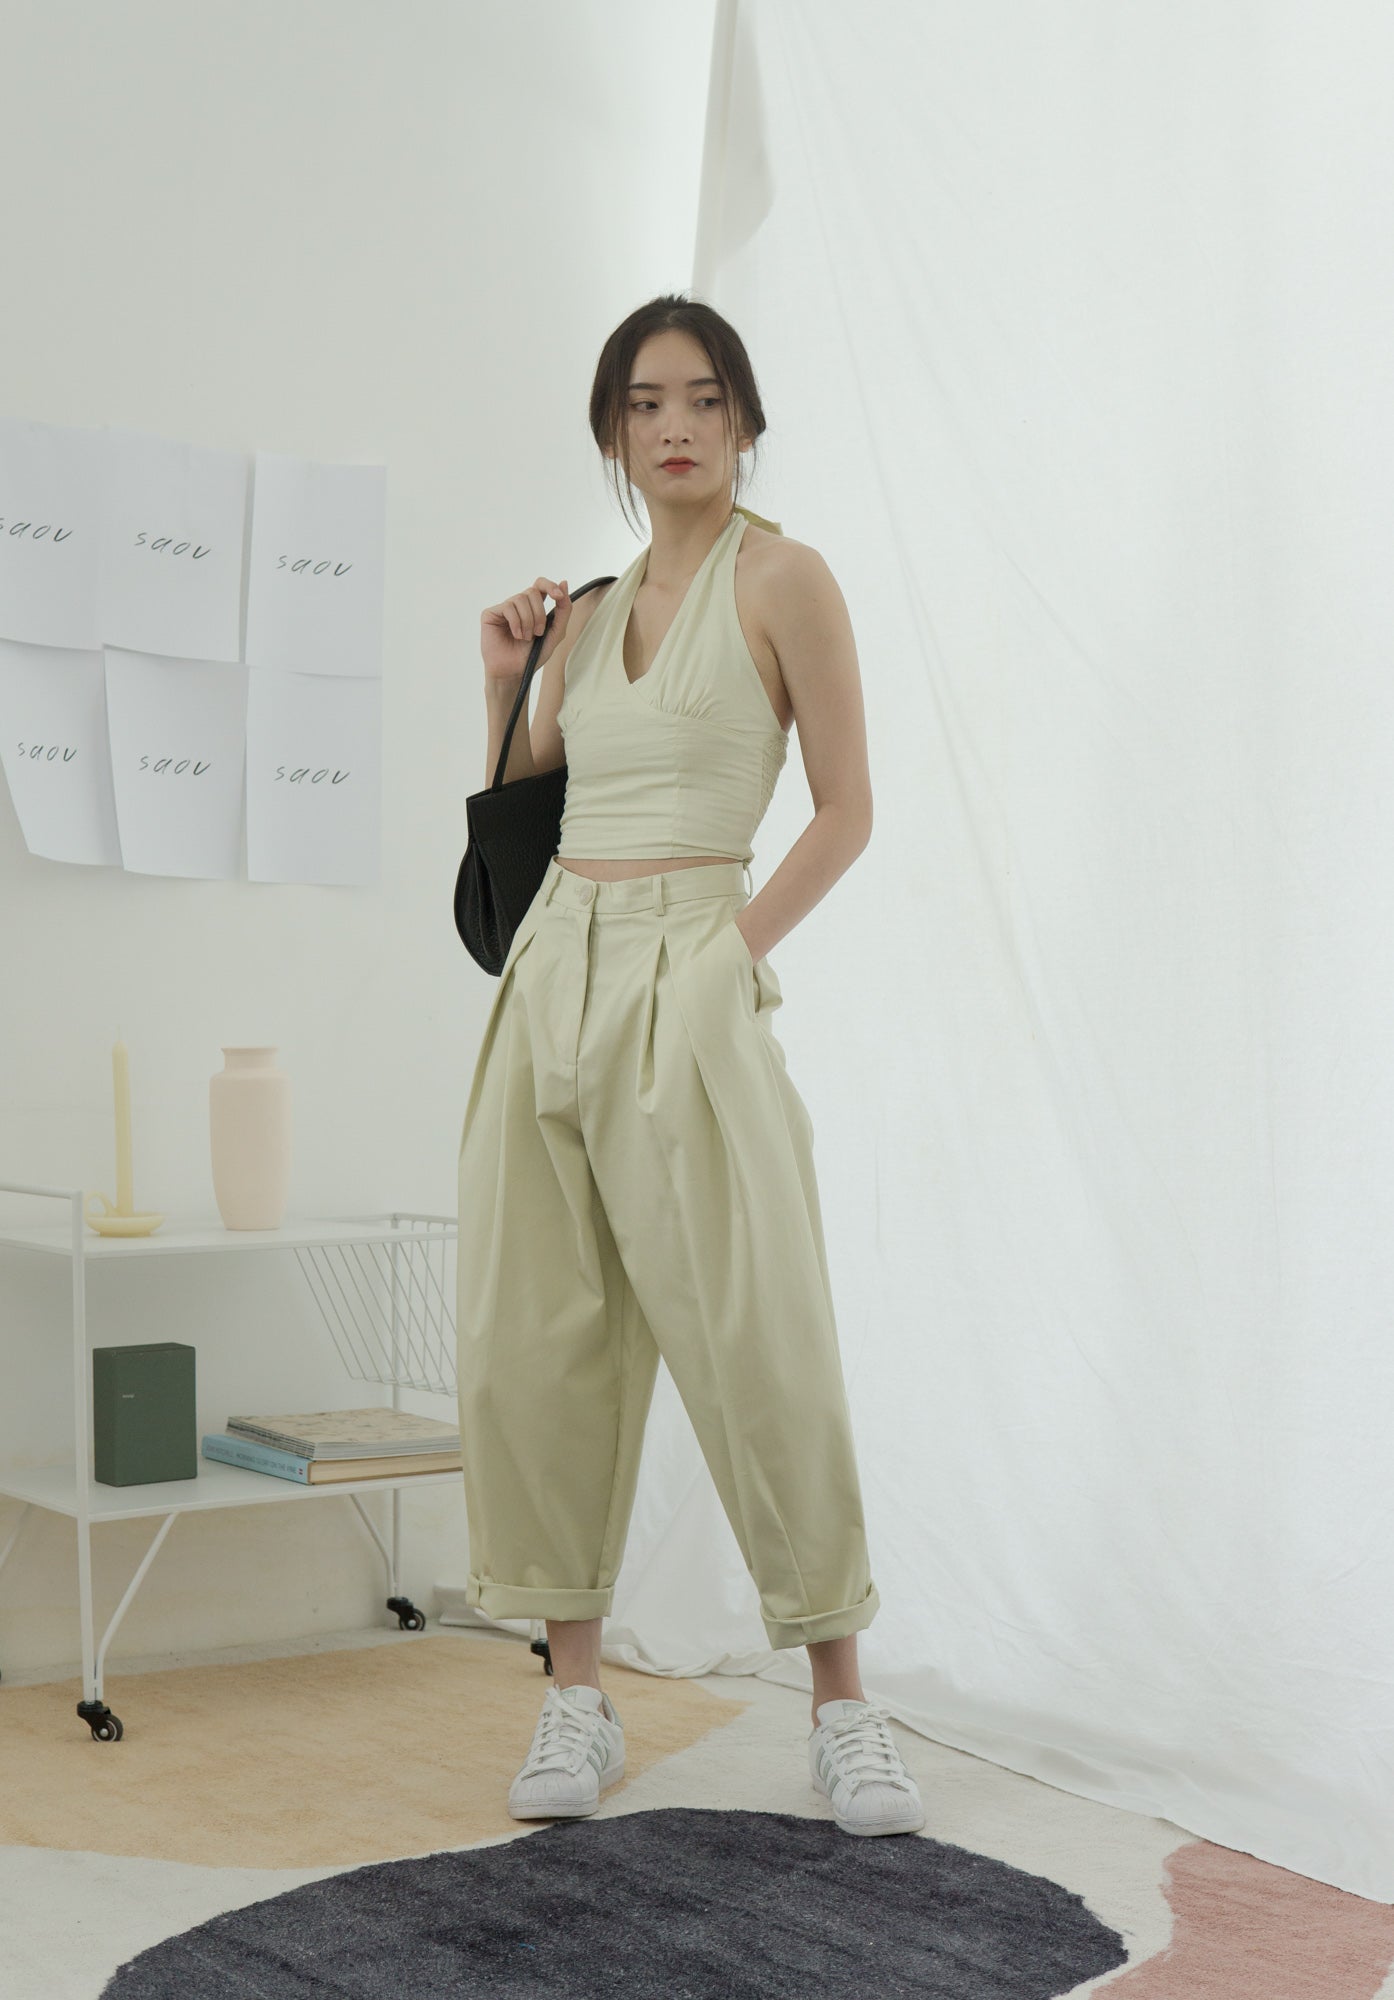 High-waisted, wide-legged nine-point pants in light green